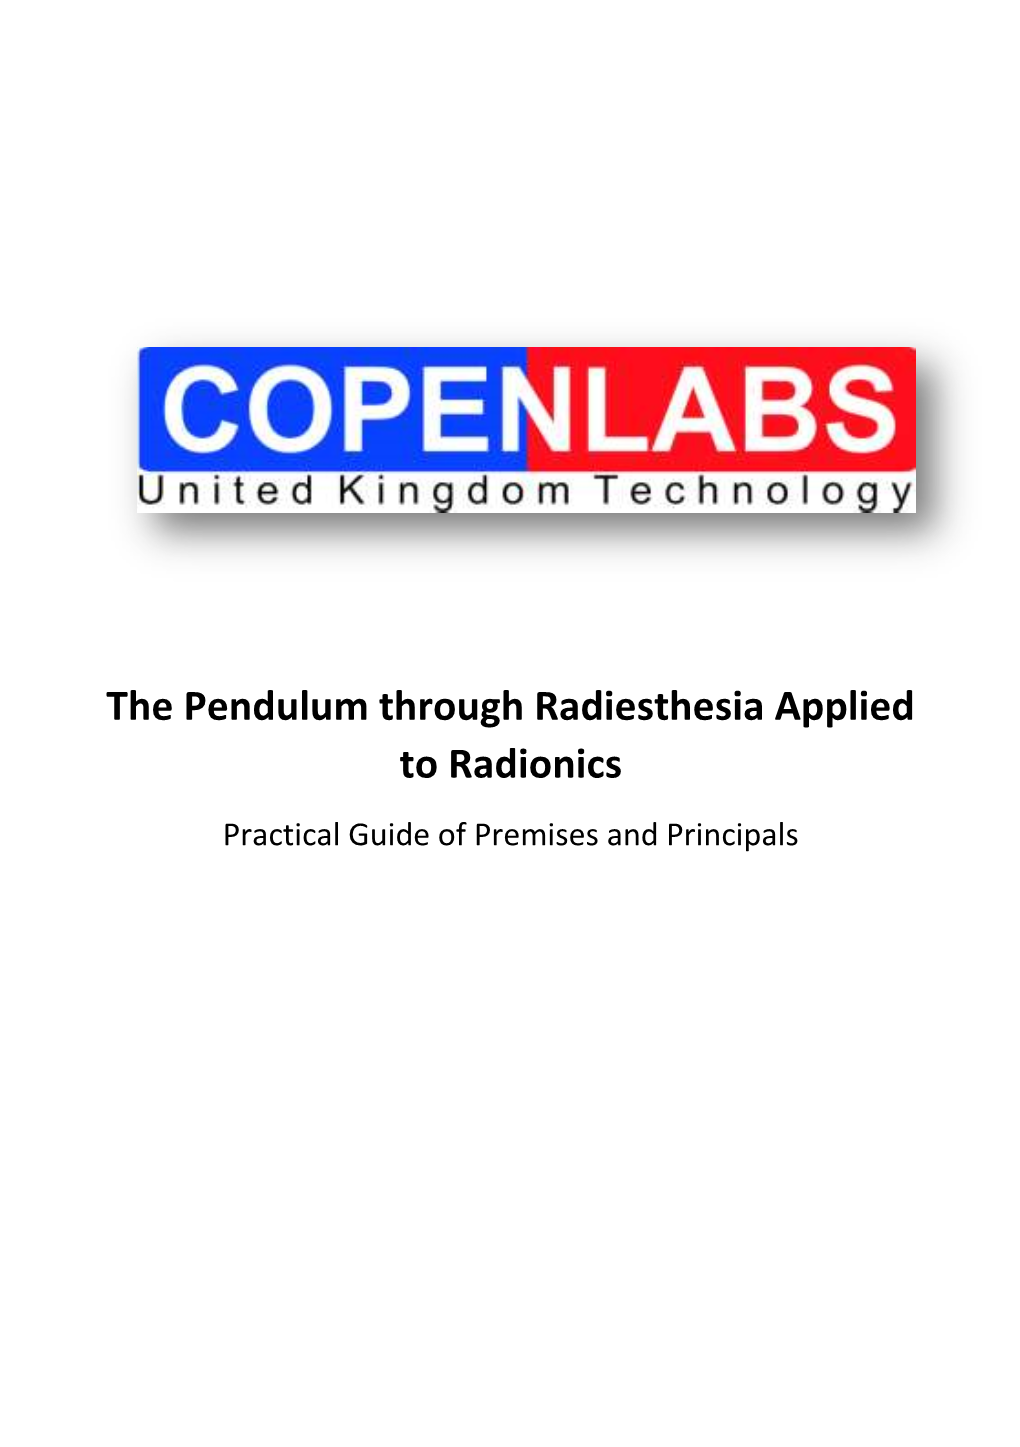 The Pendulum Through Radiesthesia Applied to Radionics Practical Guide of Premises and Principals